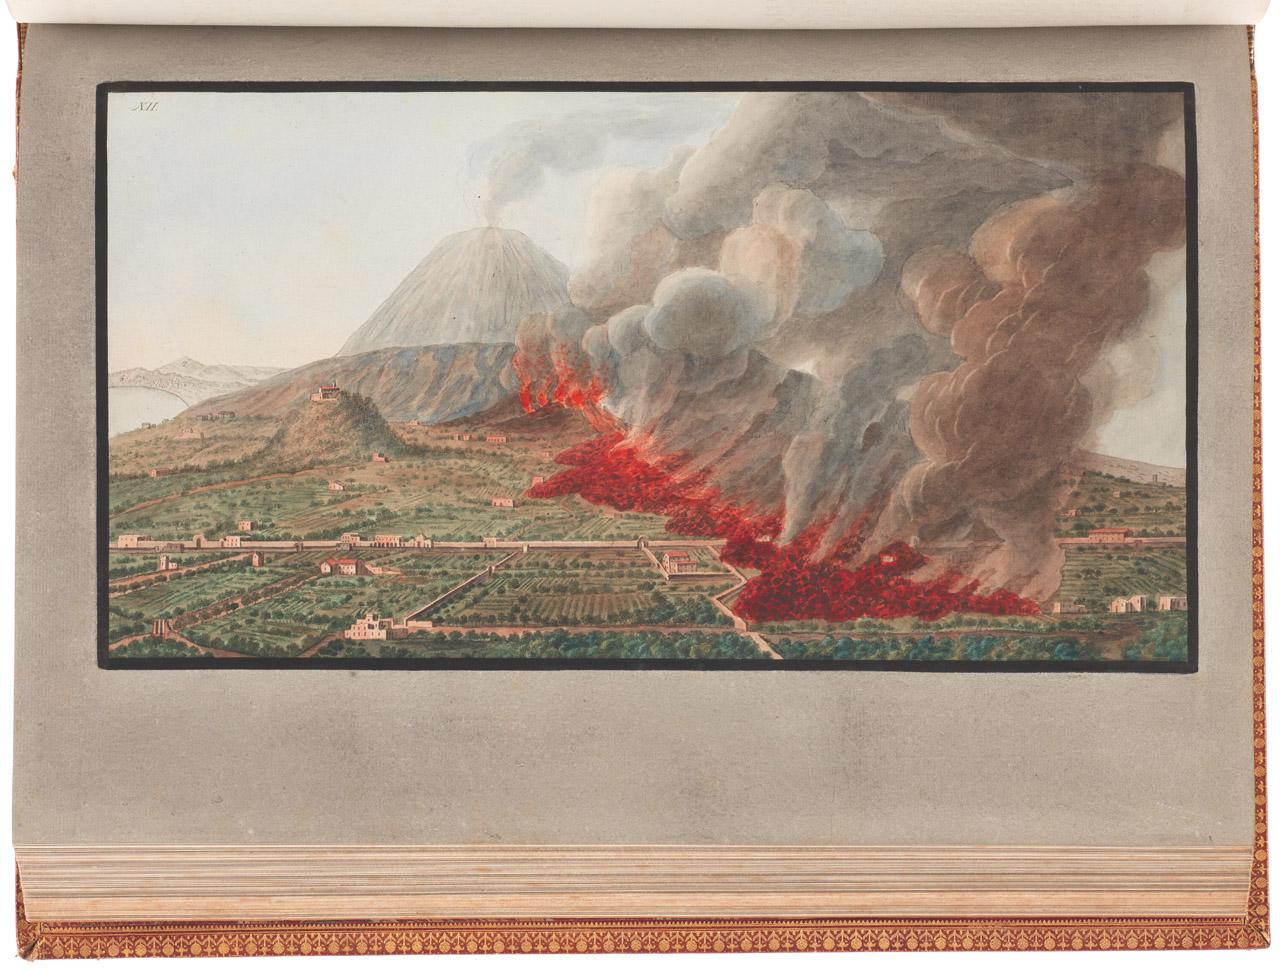 Plate XII from Campi Phlegraei showing a view of an eruption of Mount Vesuvius. Lava can be seen flowing down the mountain into the fields and houses below.